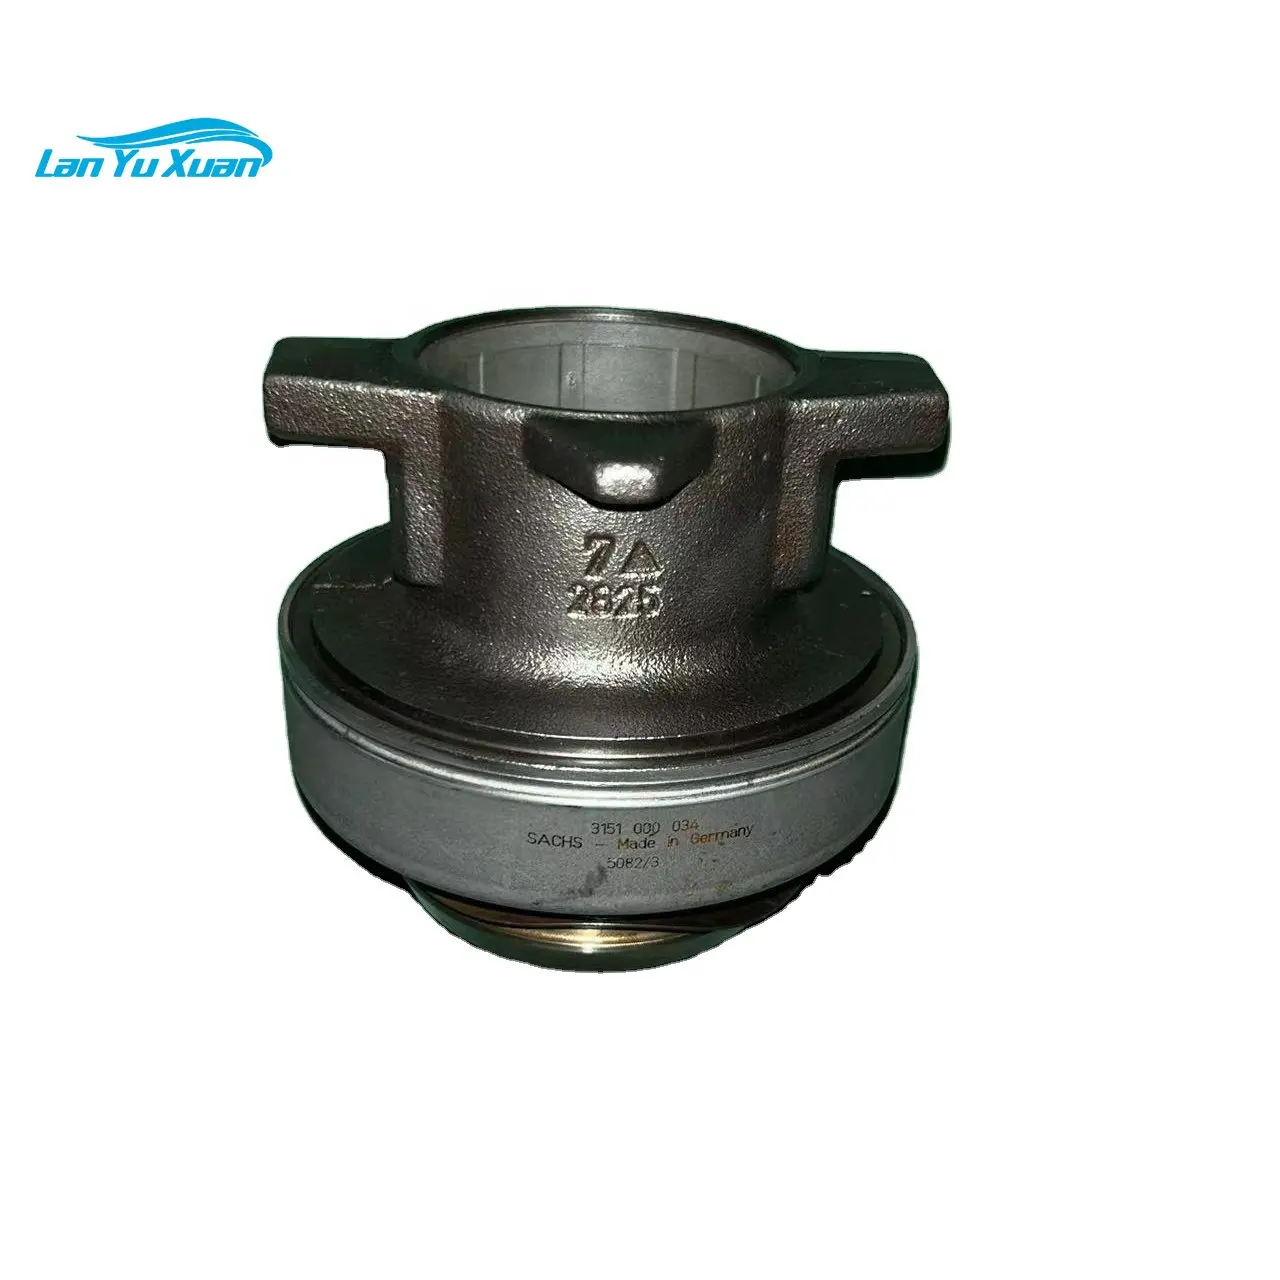 SACHS 3151000034 81.30000-6587 81.30000-6600 81.30550-0063 1250710 1303975 1362752 Clutch Release Bearing best selling clutch release bearing car for sonata 9 auto replacement oe 41420 2d000